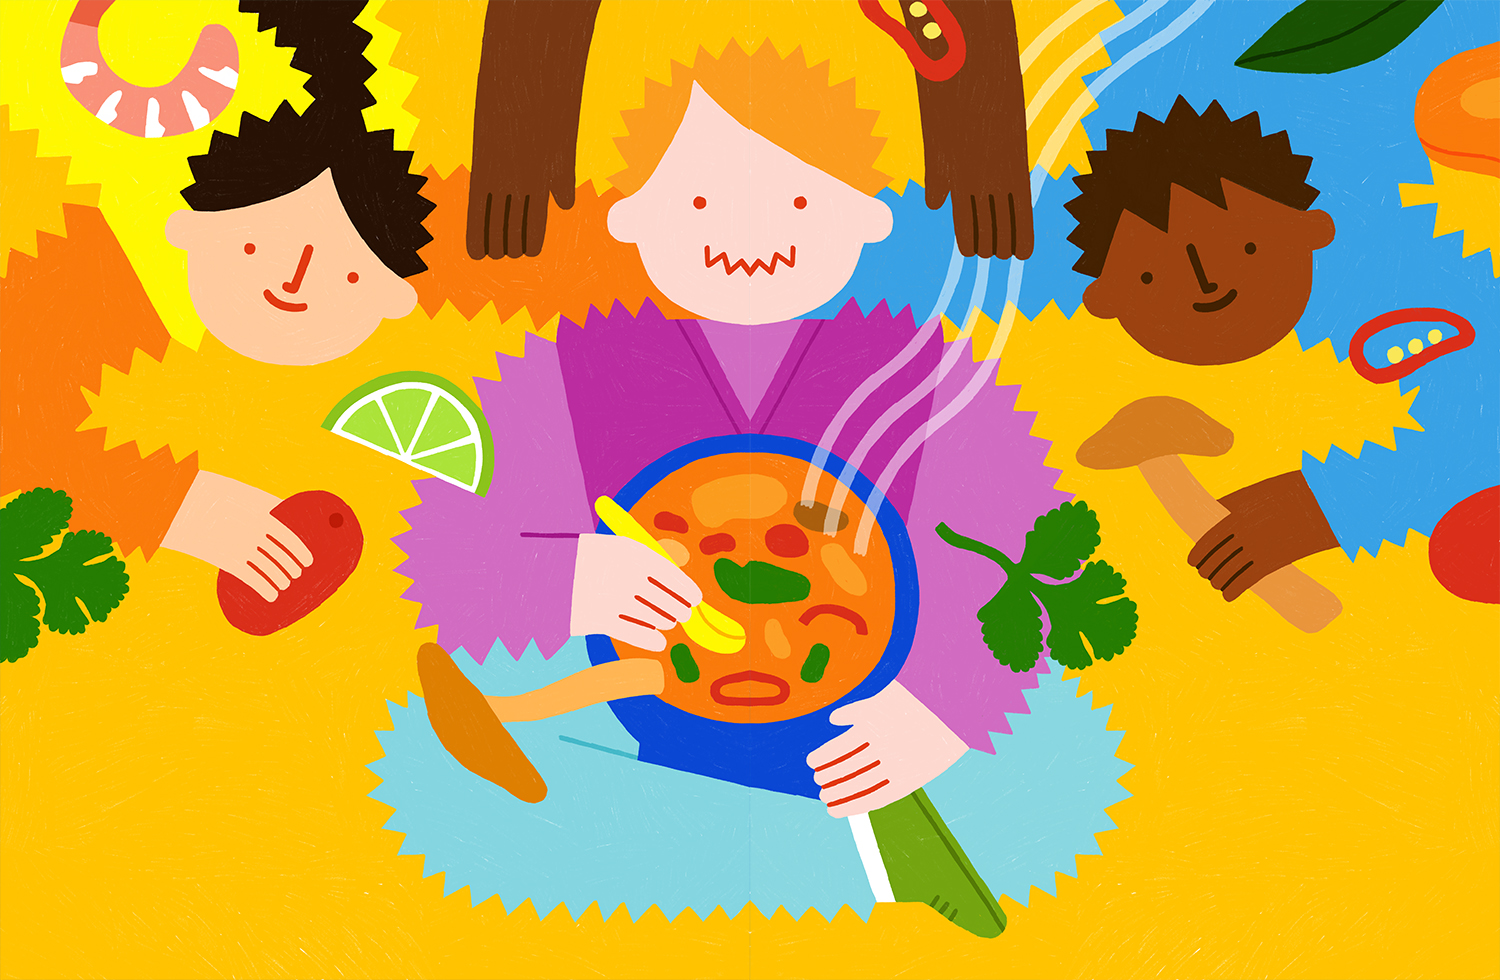 A colorful illustration of people sharing an asian meal and drinks